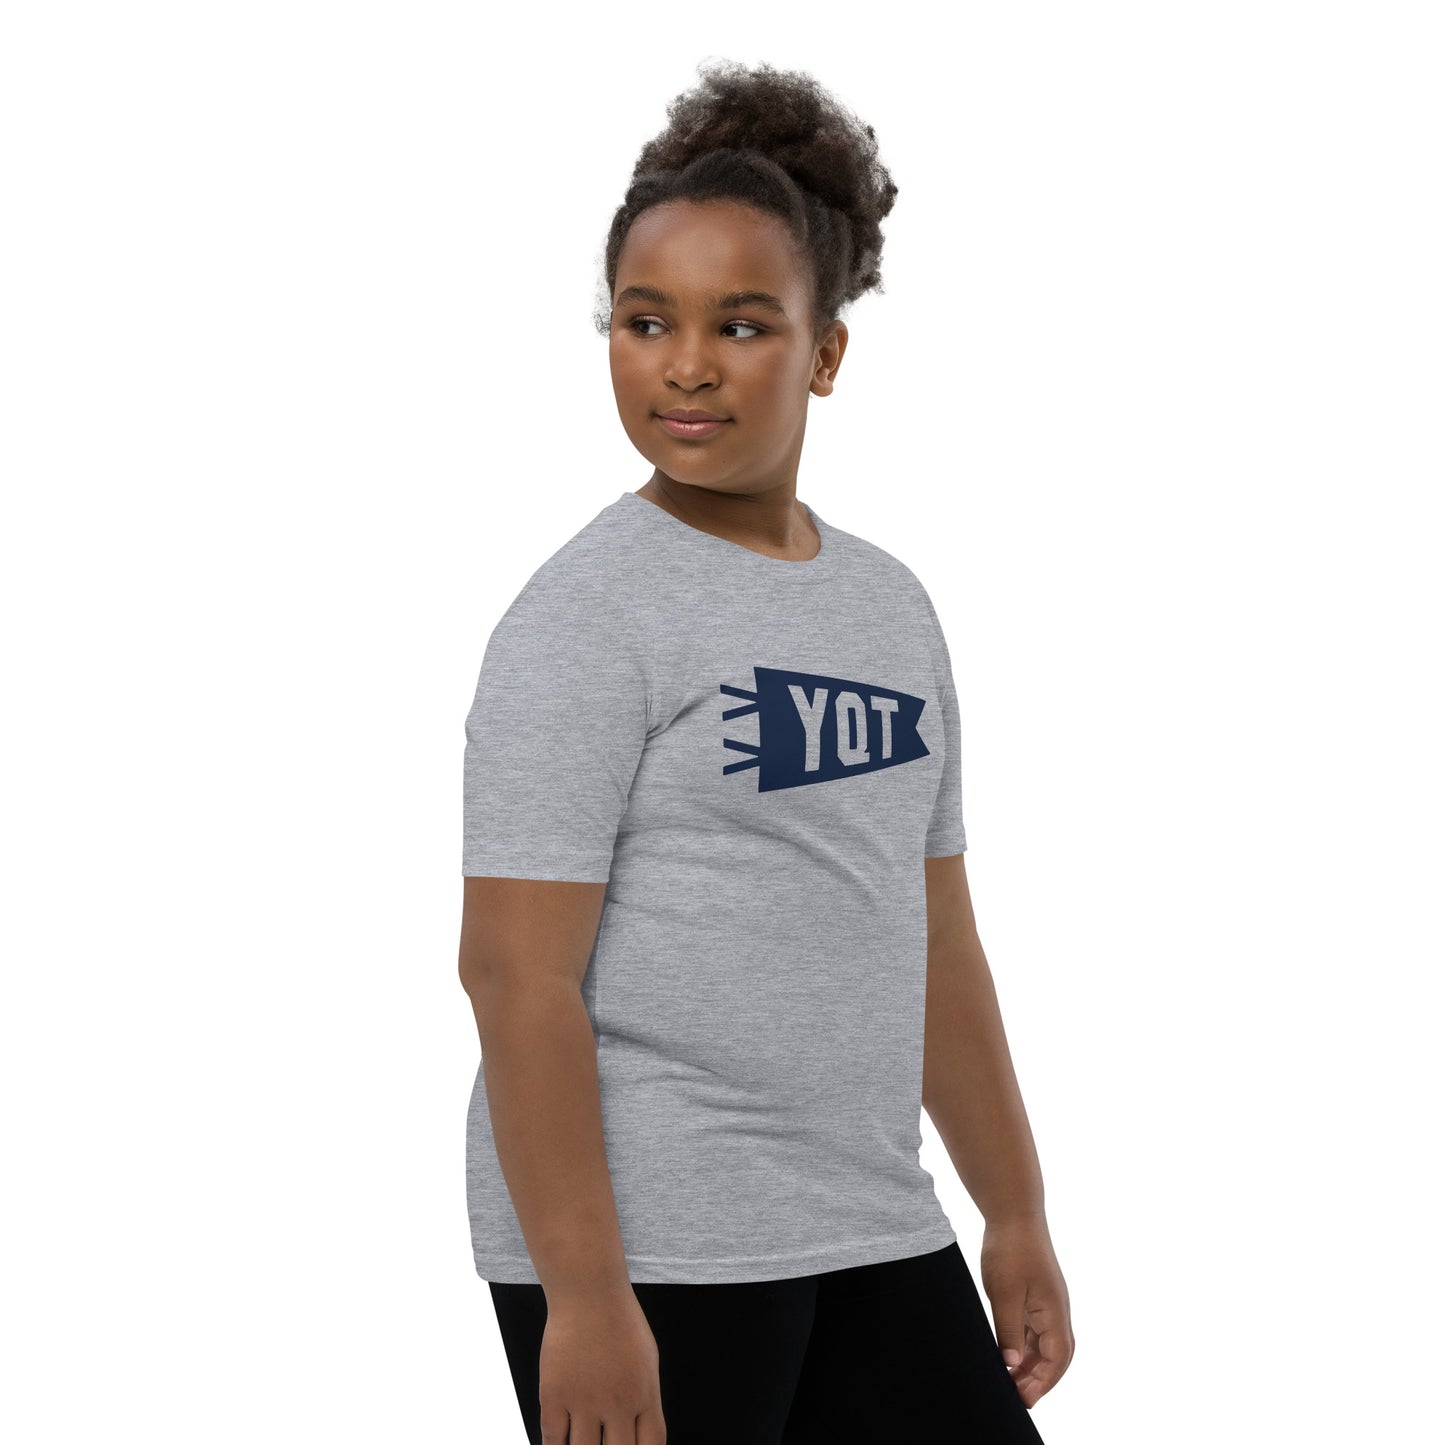 Kid's Airport Code Tee - Navy Blue Graphic • YQT Thunder Bay • YHM Designs - Image 03